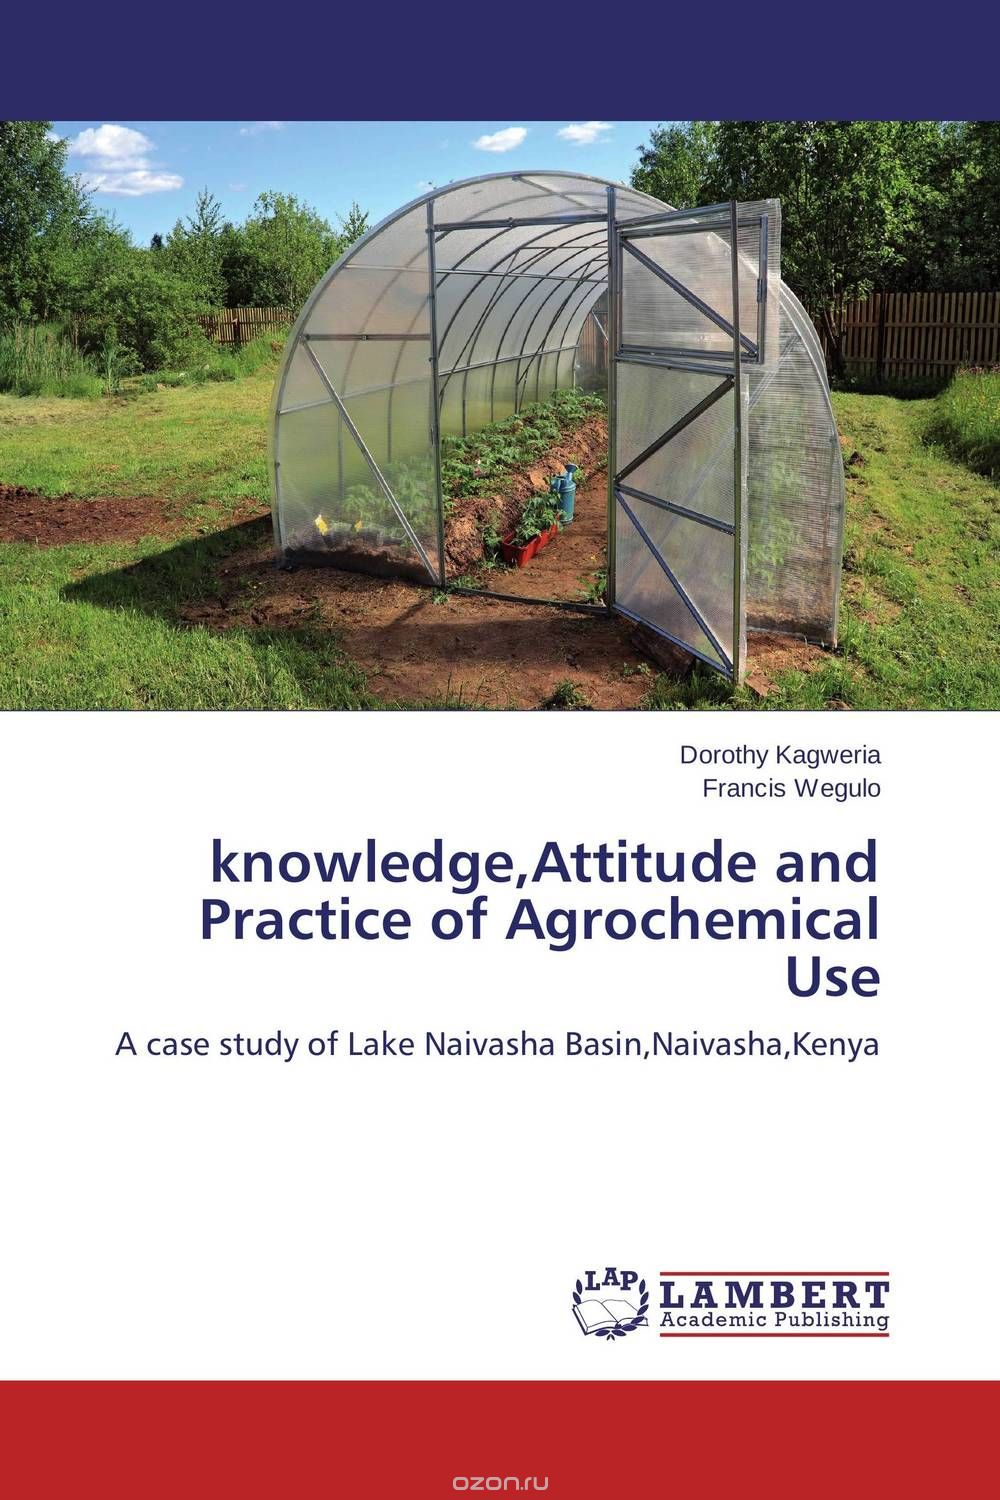 knowledge,Attitude and Practice of Agrochemical Use